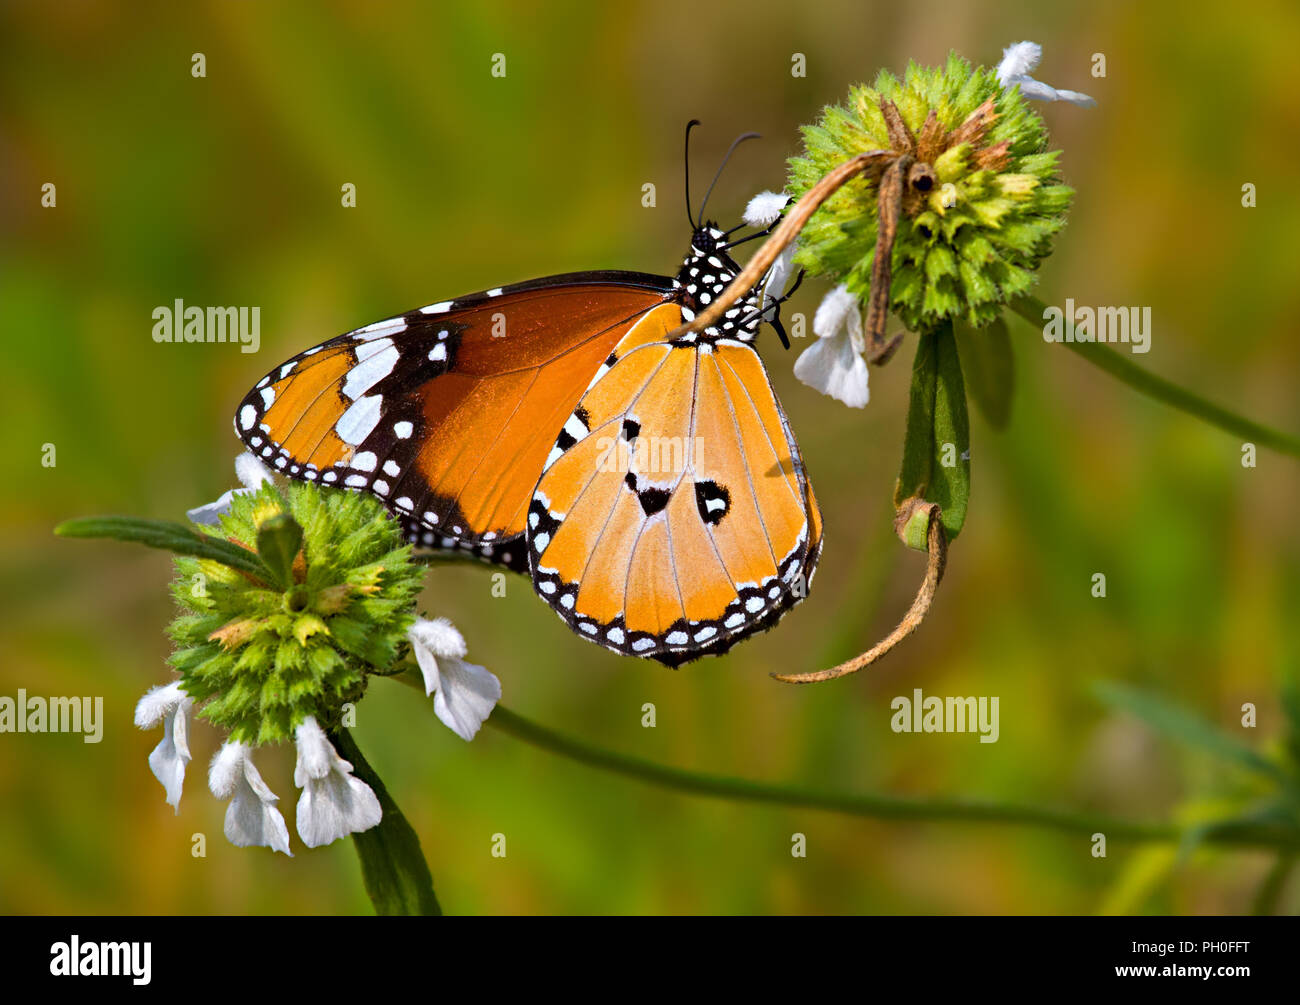 Orange butterfly Plain Tiger or Danaus chrysippus drinking nectar among white flowers in a garden. Stock Photo